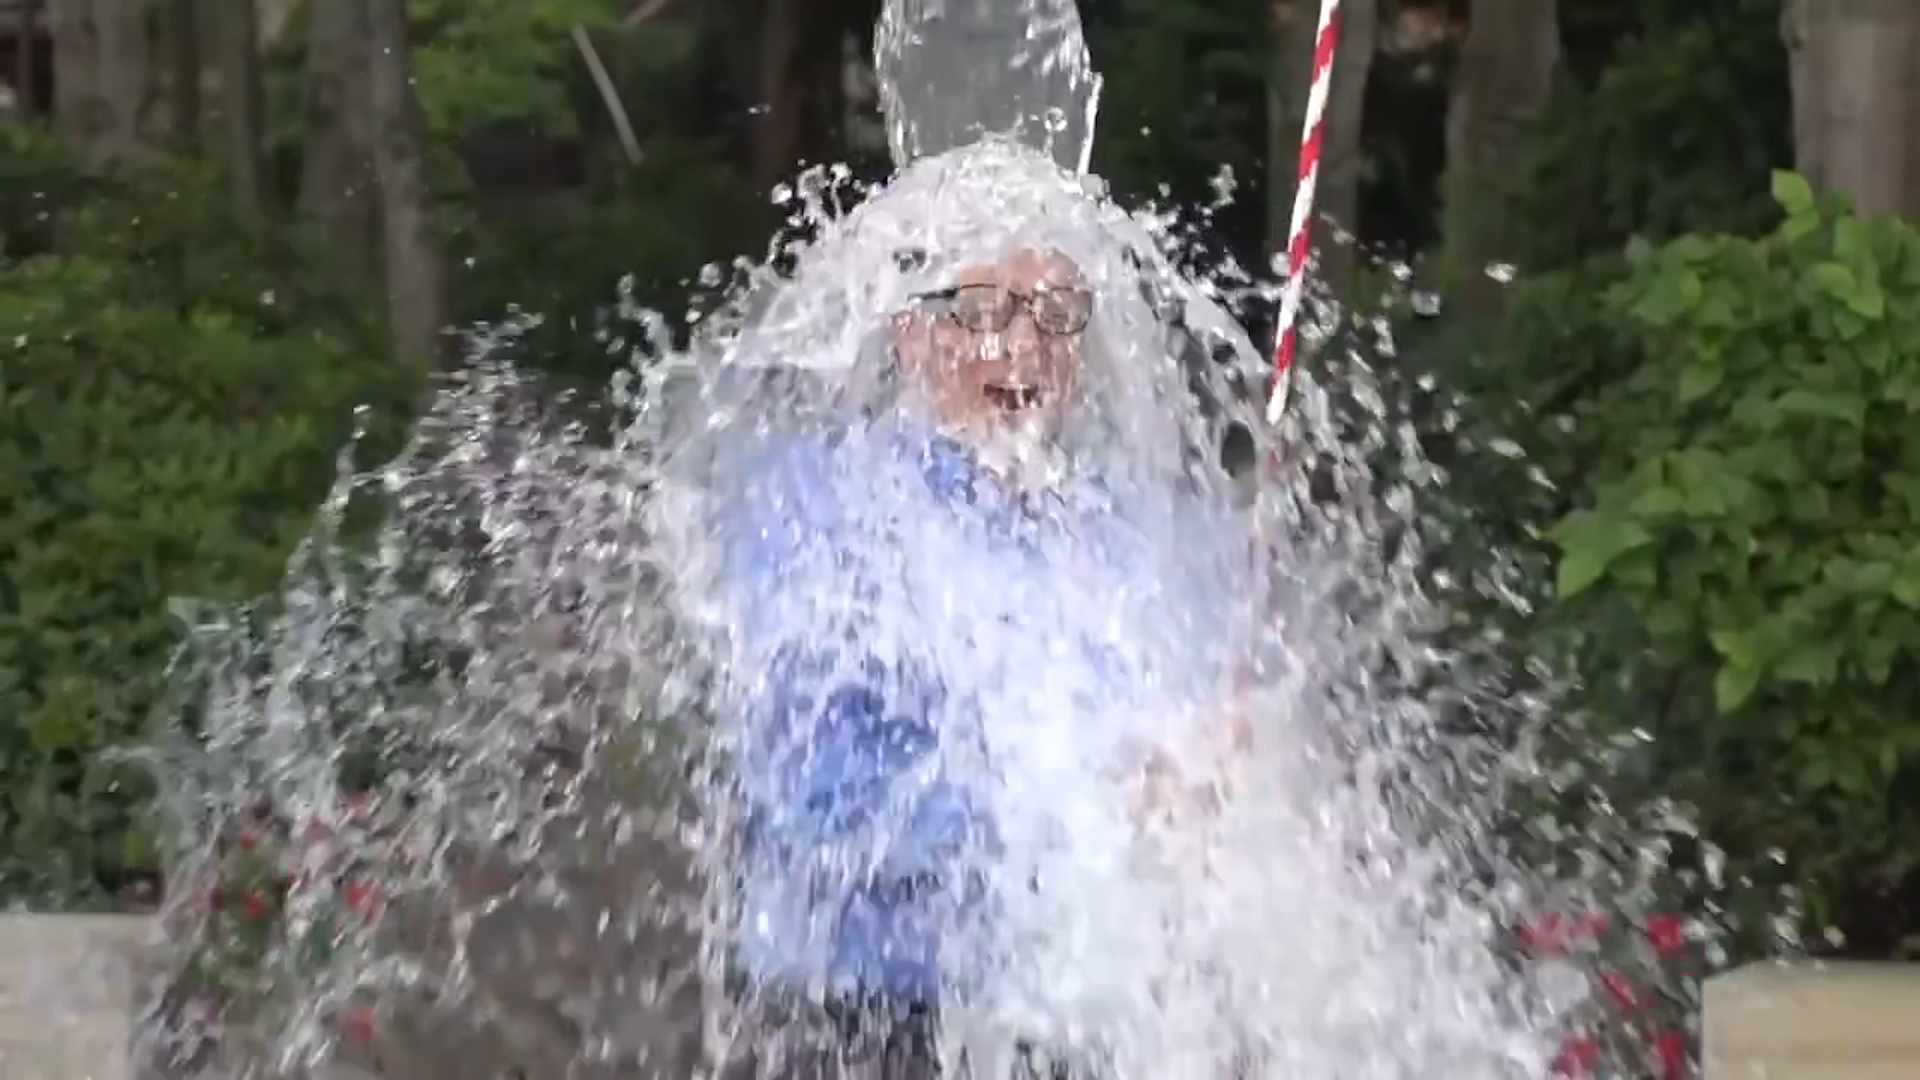 a man in a business suit having ice water dumped on his head for the ALS ice bucket challenge